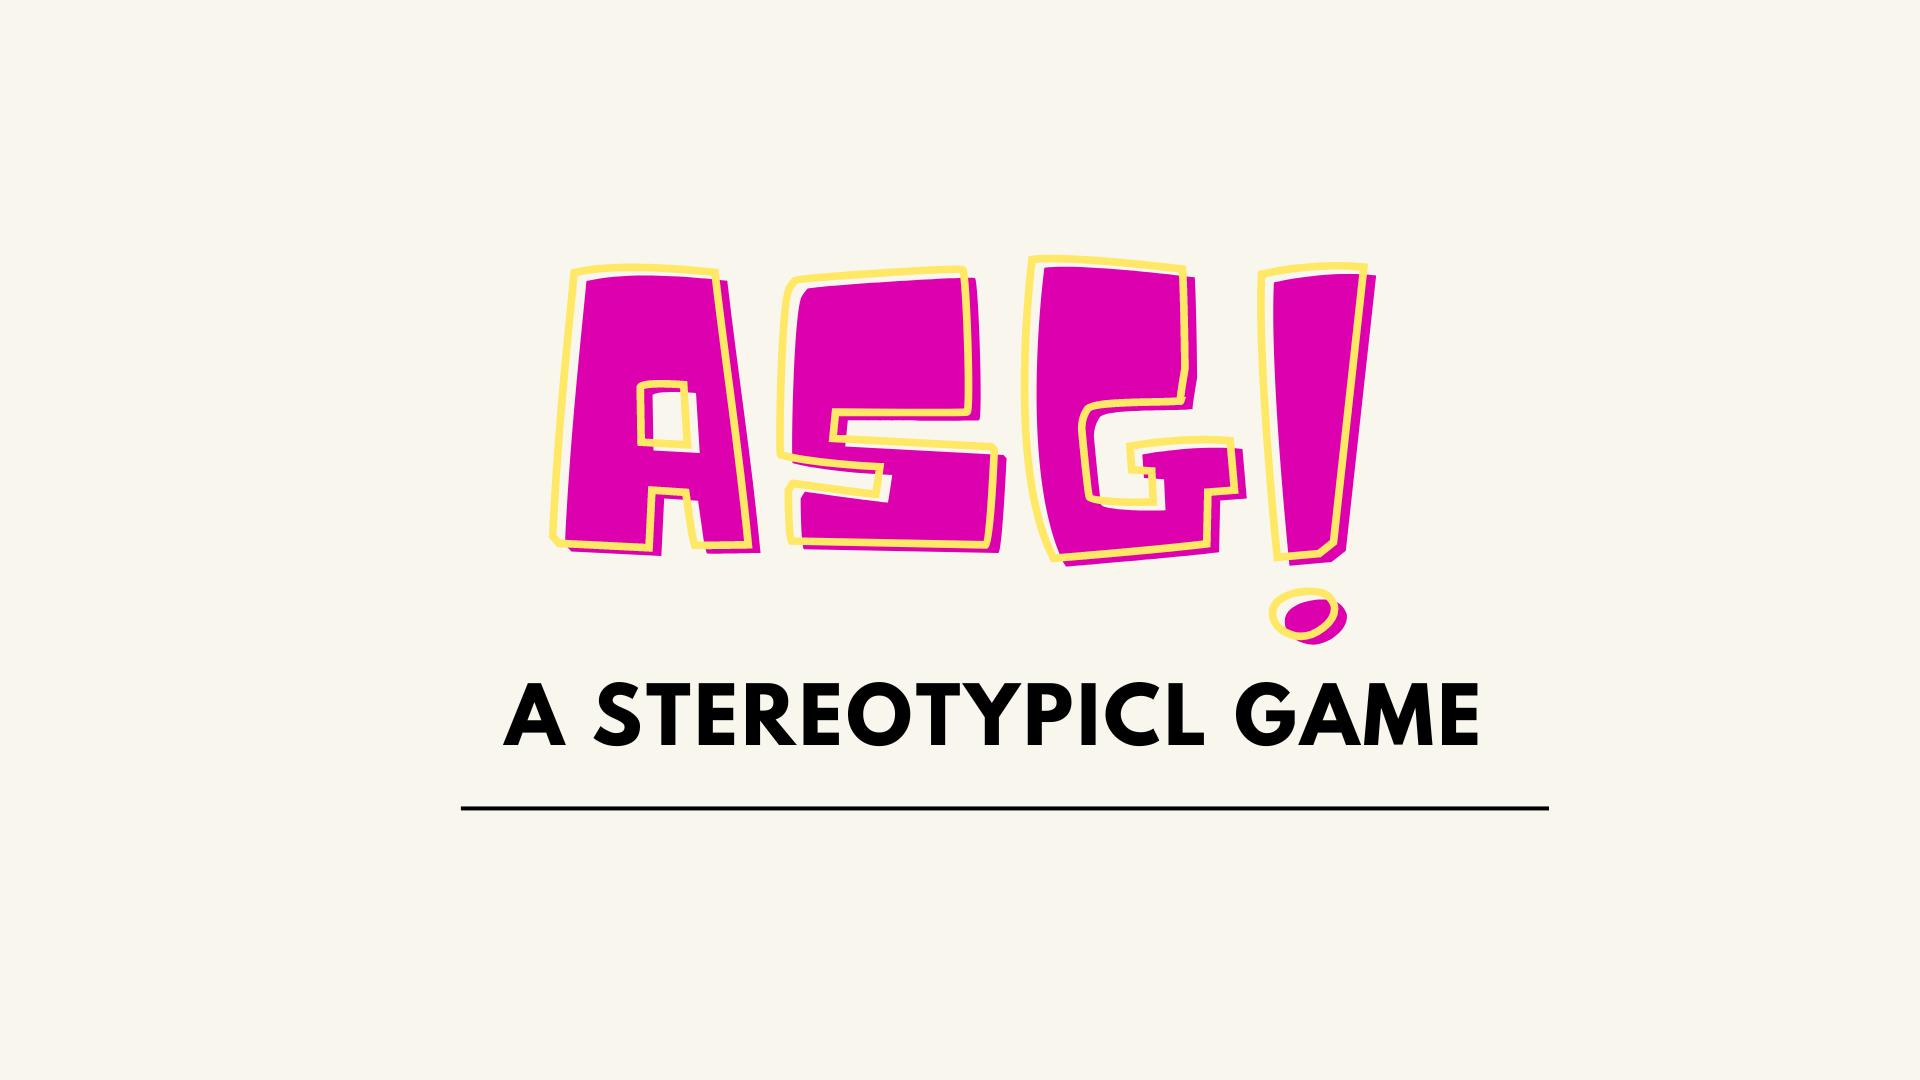 A Stereotypical Game